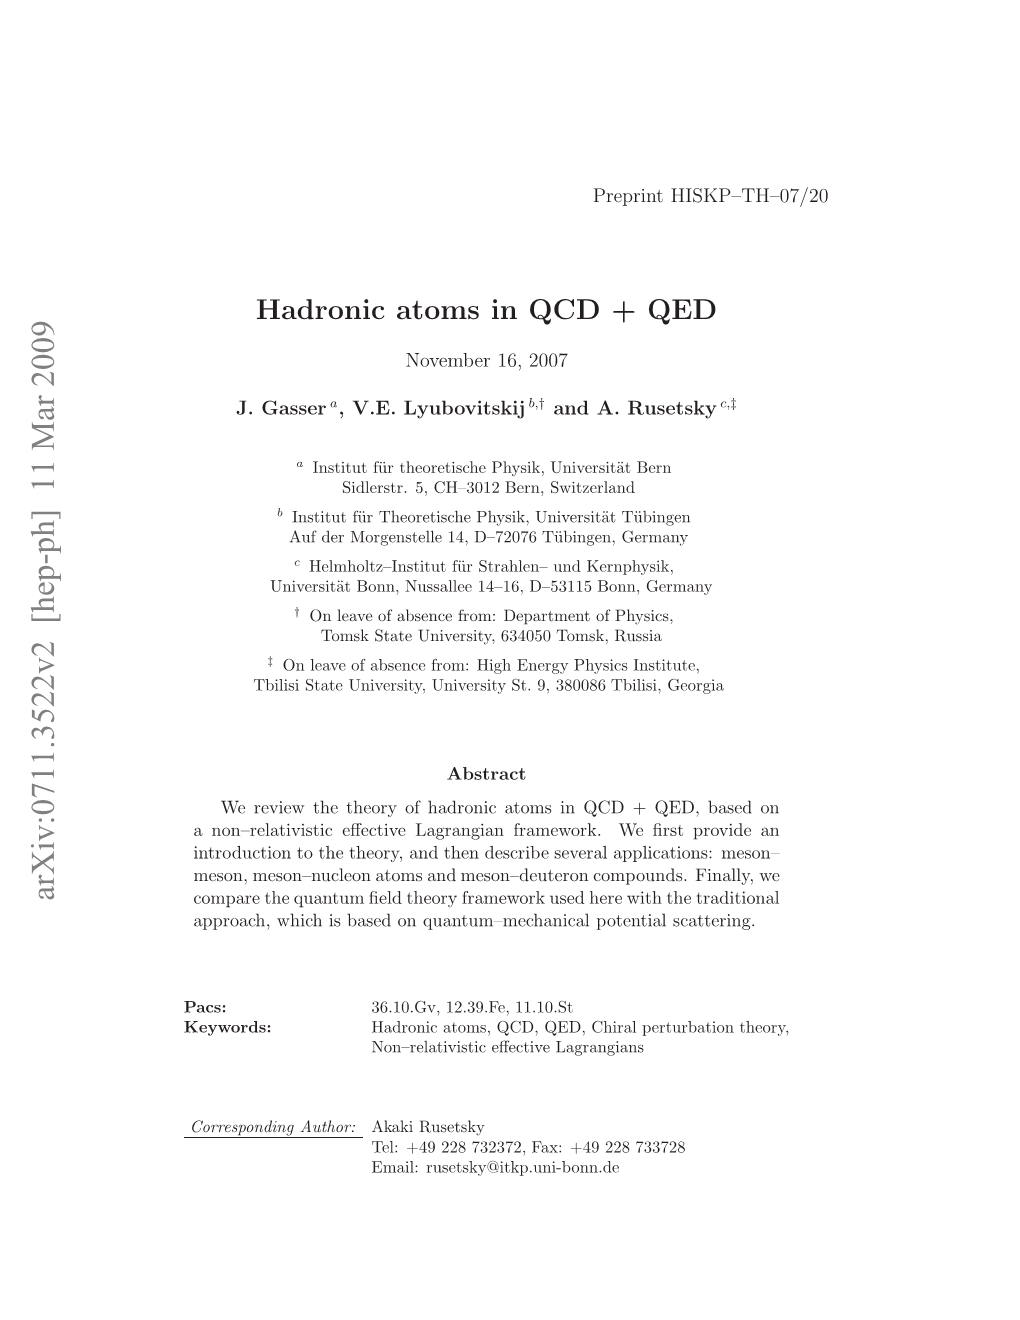 Hadronic Atoms in QCD +